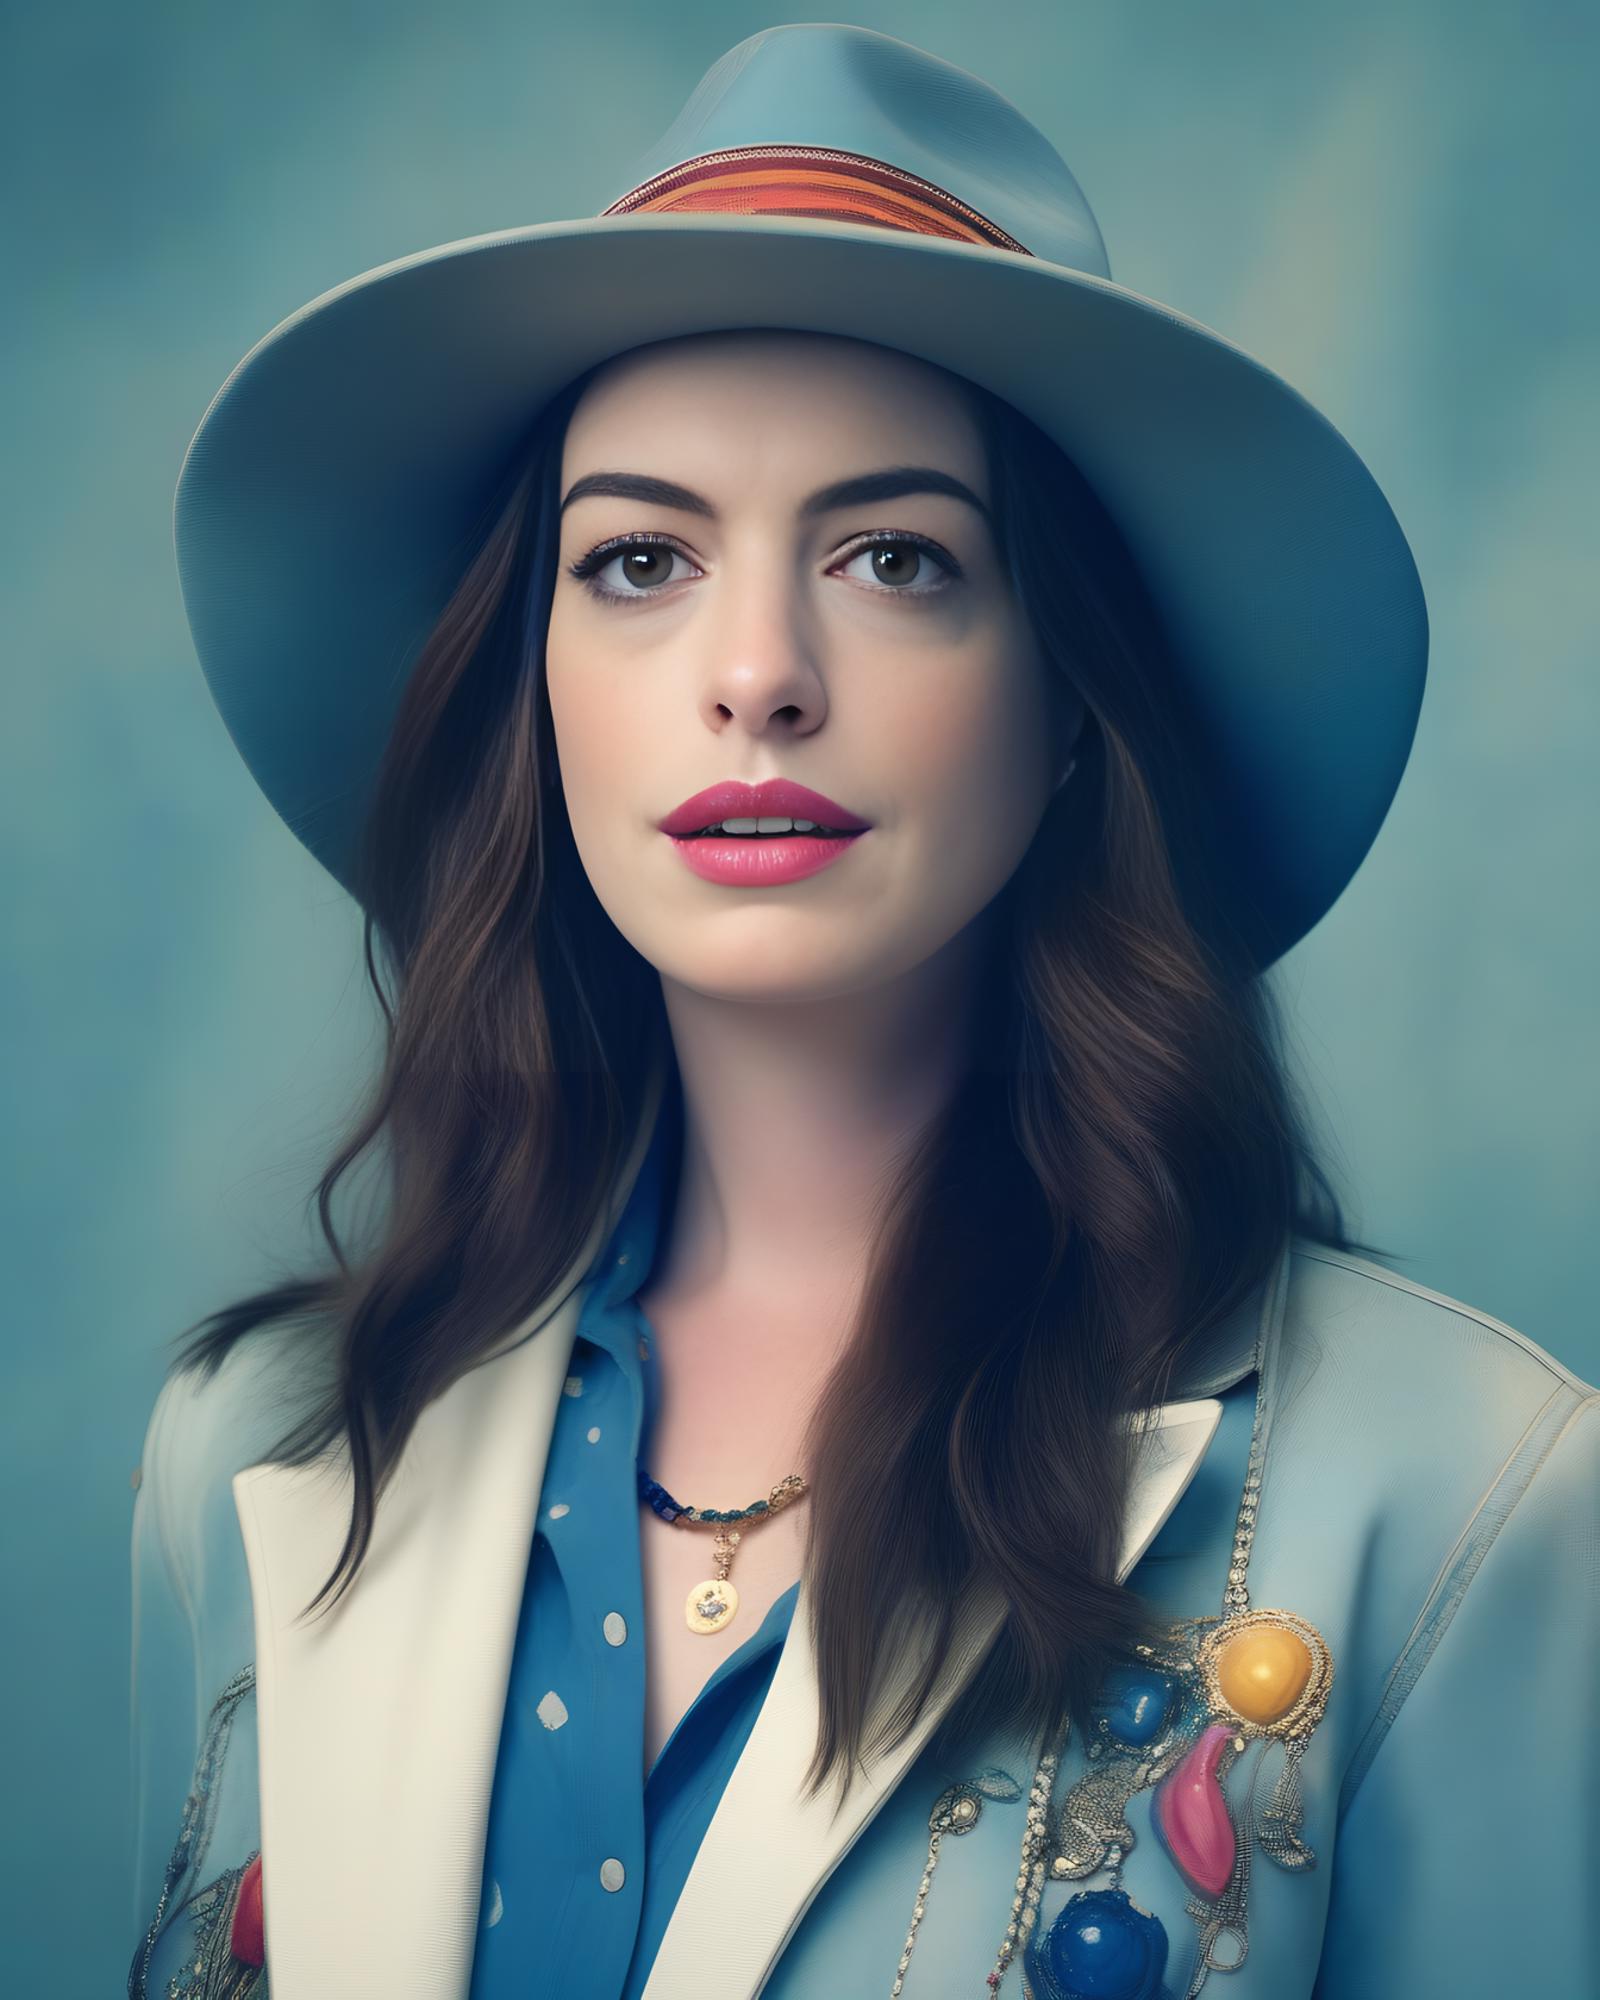 Anne Hathaway image by parar20